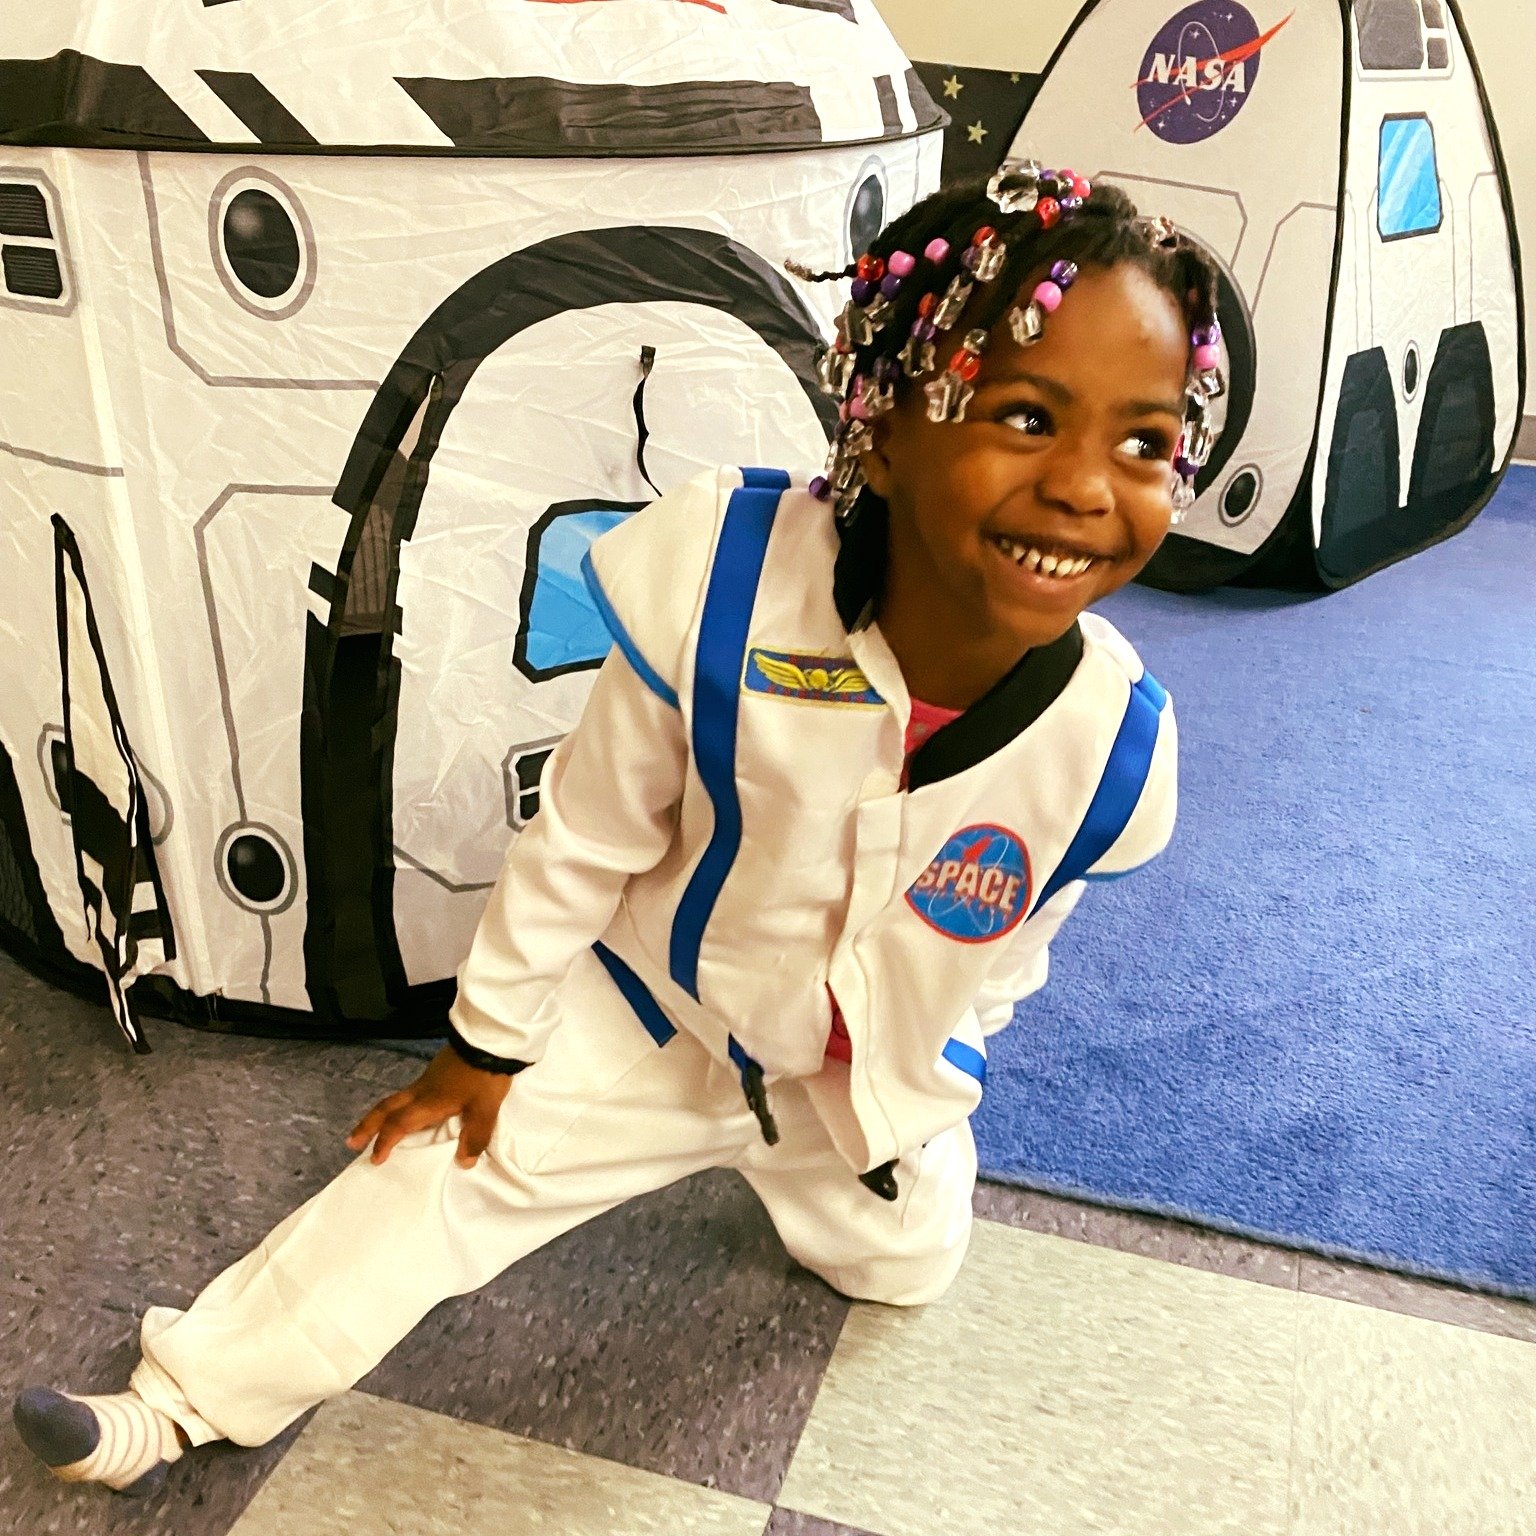 When you're in preschool, but you're also an astronaut. 😄 (Thank you Ms. Mullins and Ms. Sumaya for teaching our Hawthorn children all about outer space in the best way -- through play!)